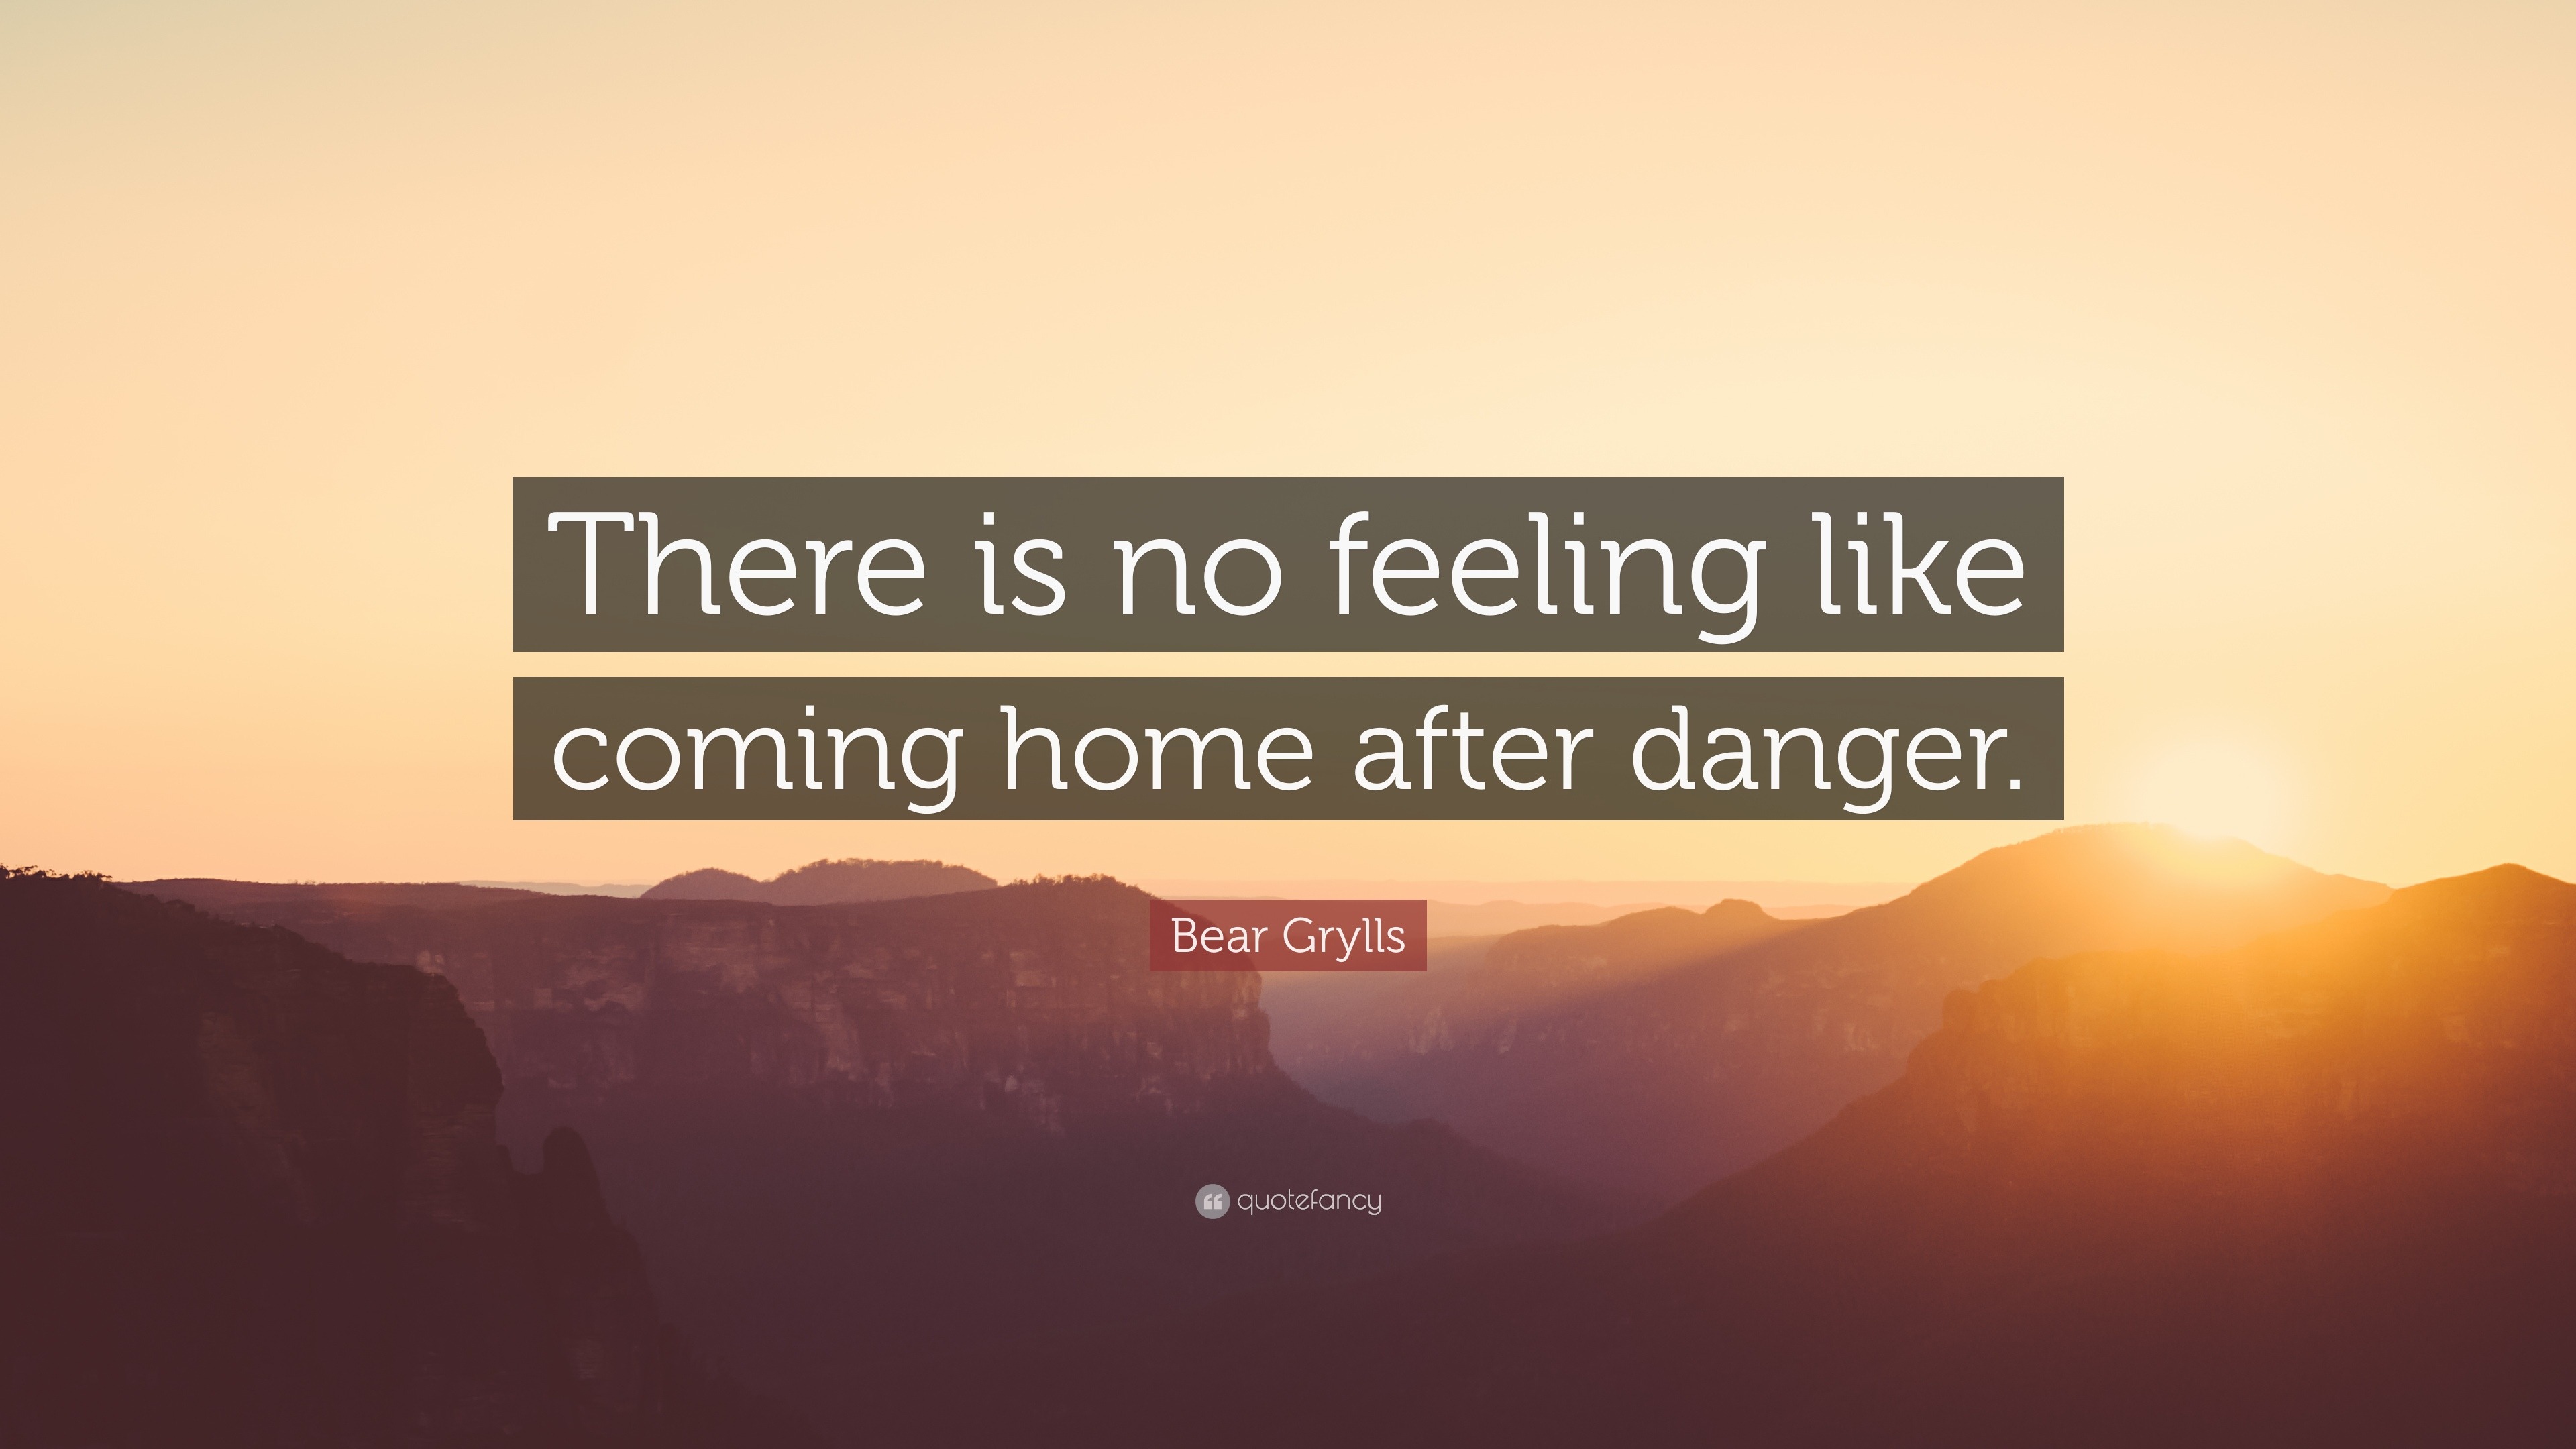 Bear Grylls Quotes 100 wallpapers  Quotefancy